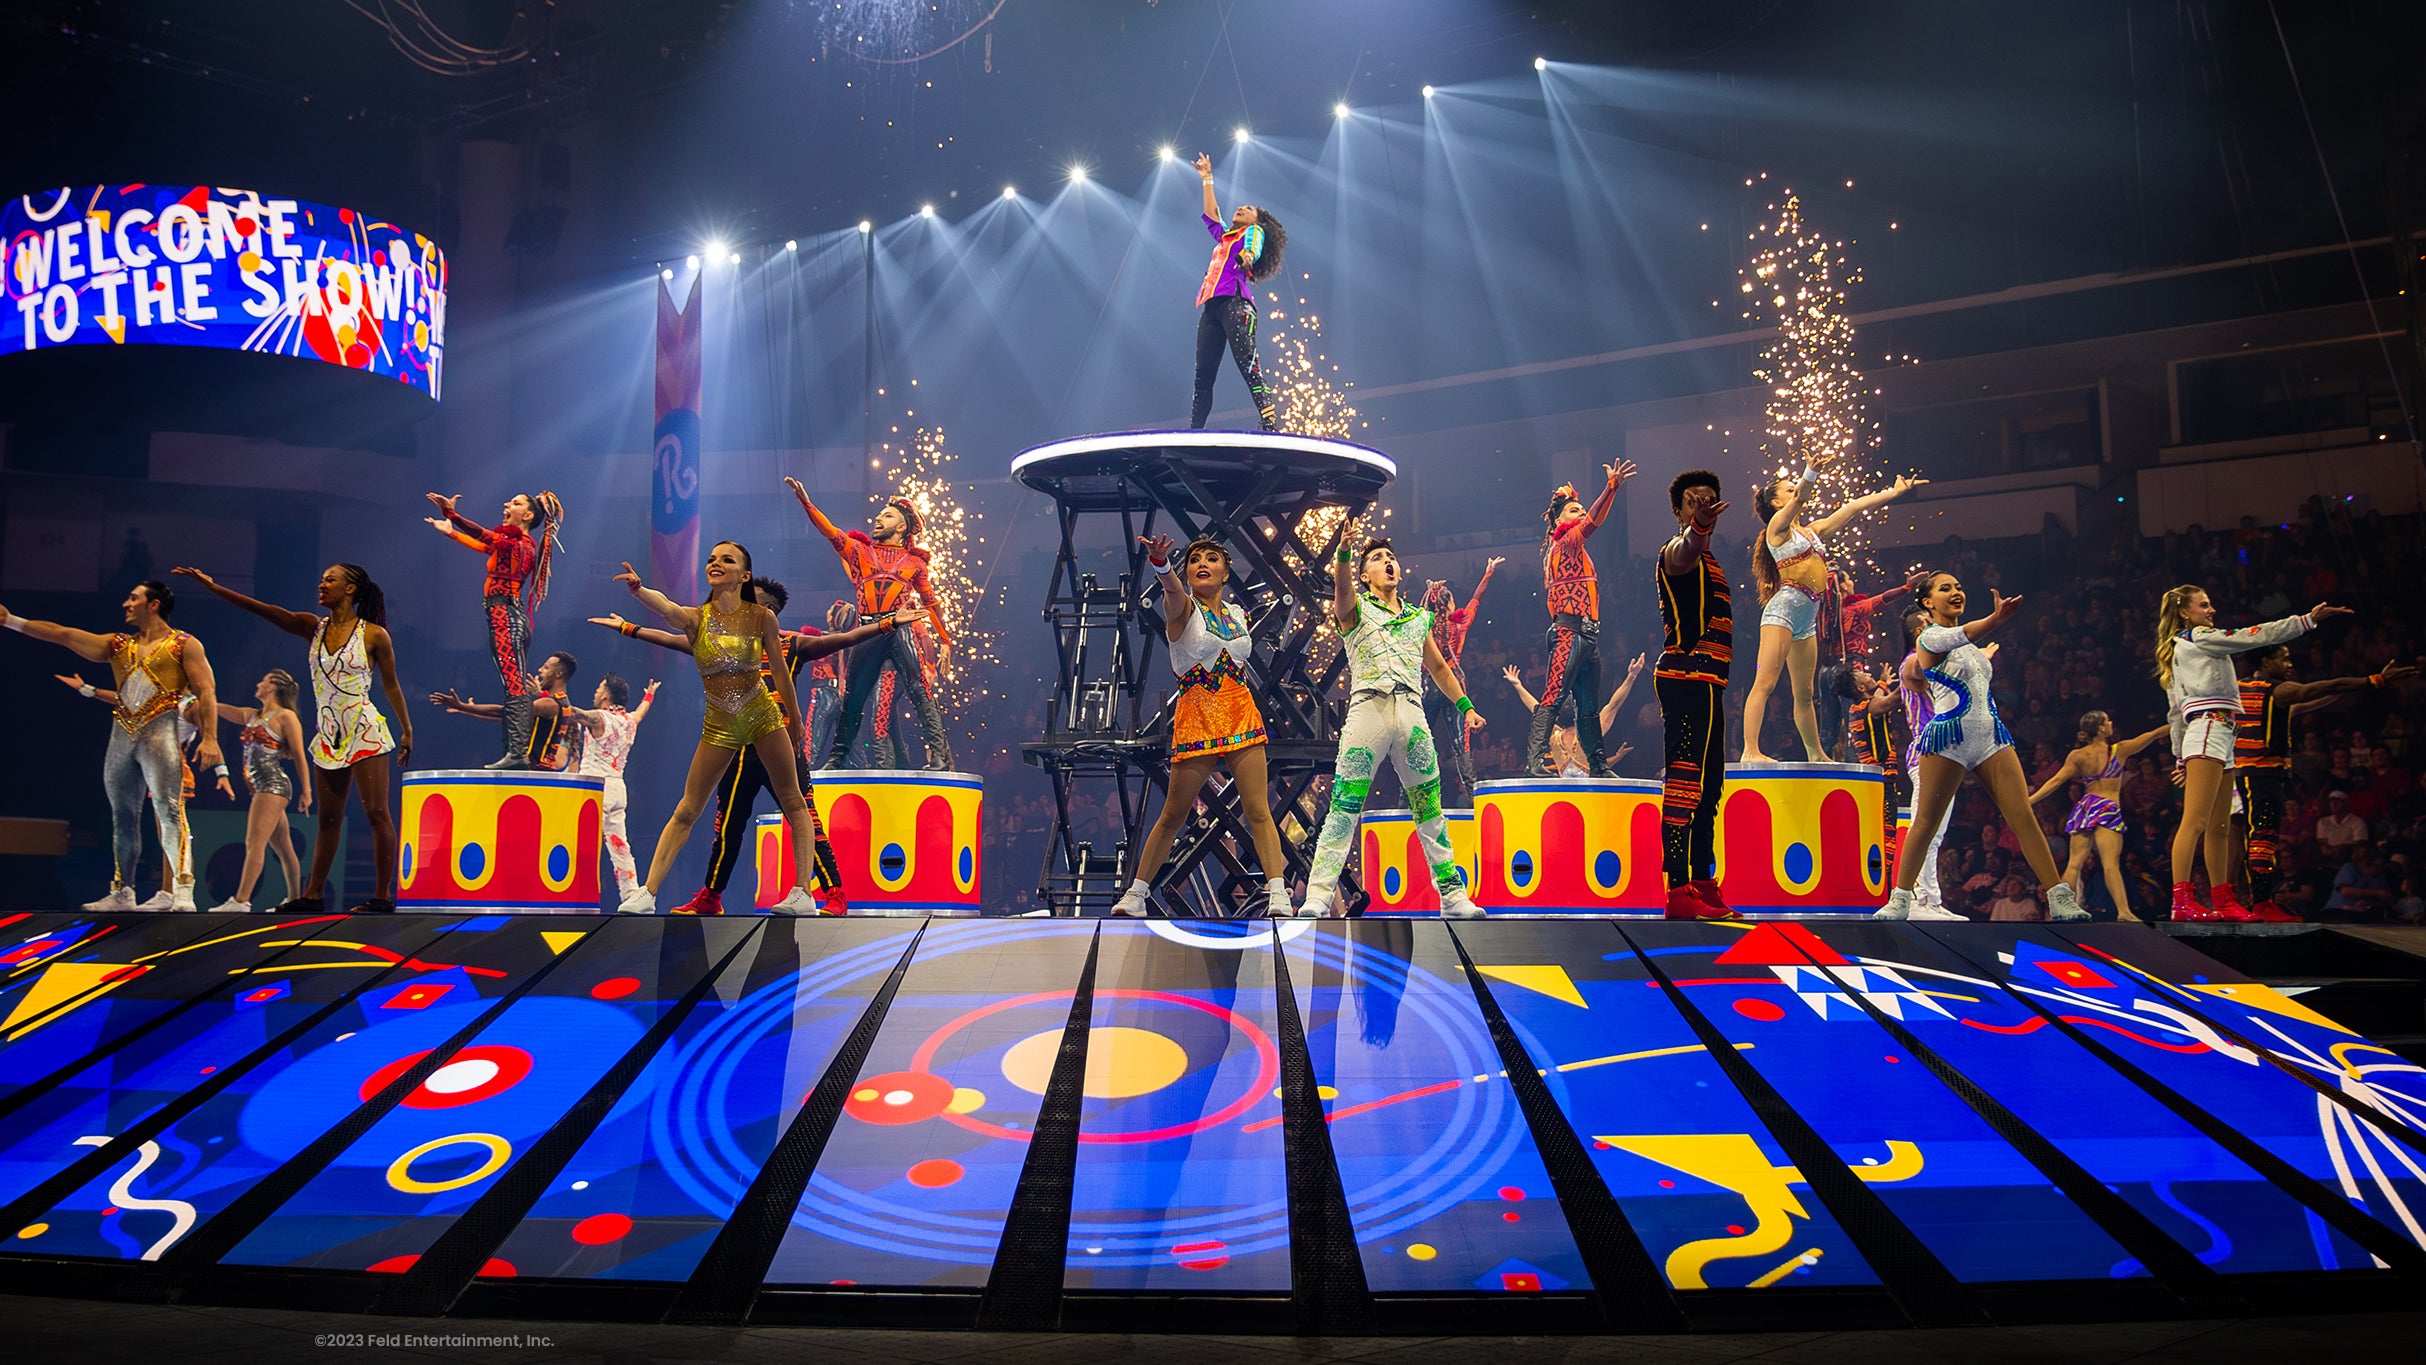 Ringling Bros. and Barnum & Bailey presents The Greatest Show On Earth in Indianapolis promo photo for Feld Preferred presale offer code